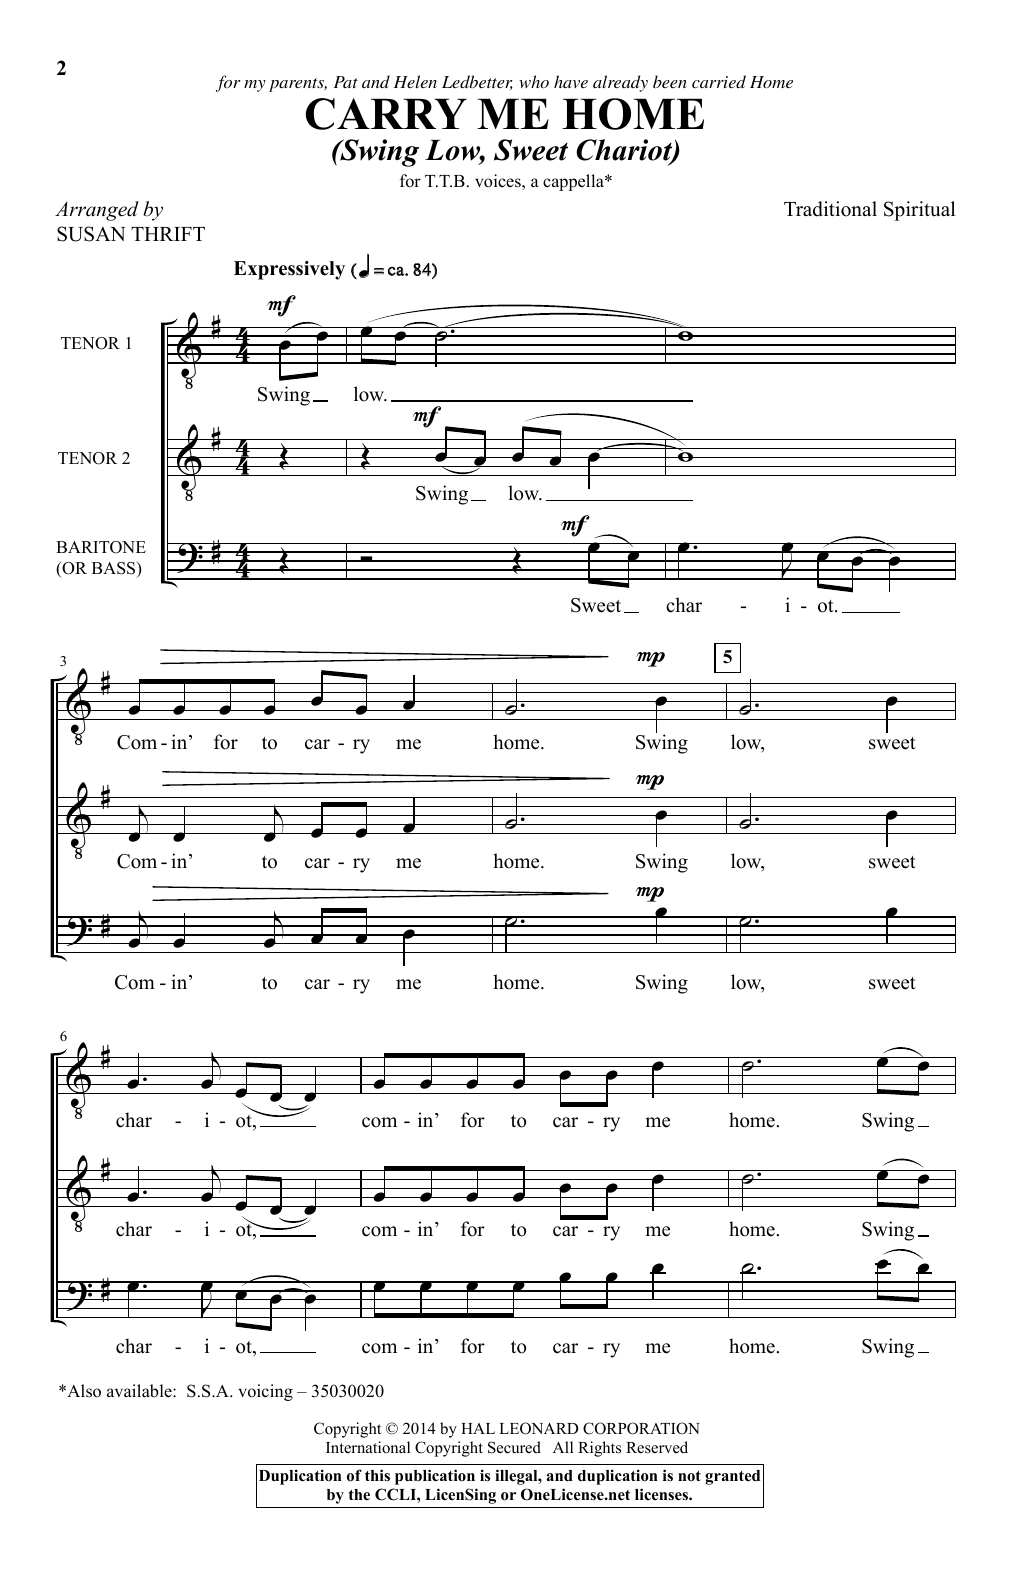 African-American Spiritual Carry Me Home (Swing Low, Sweet Chariot) (arr. Susan Thrift) Sheet Music